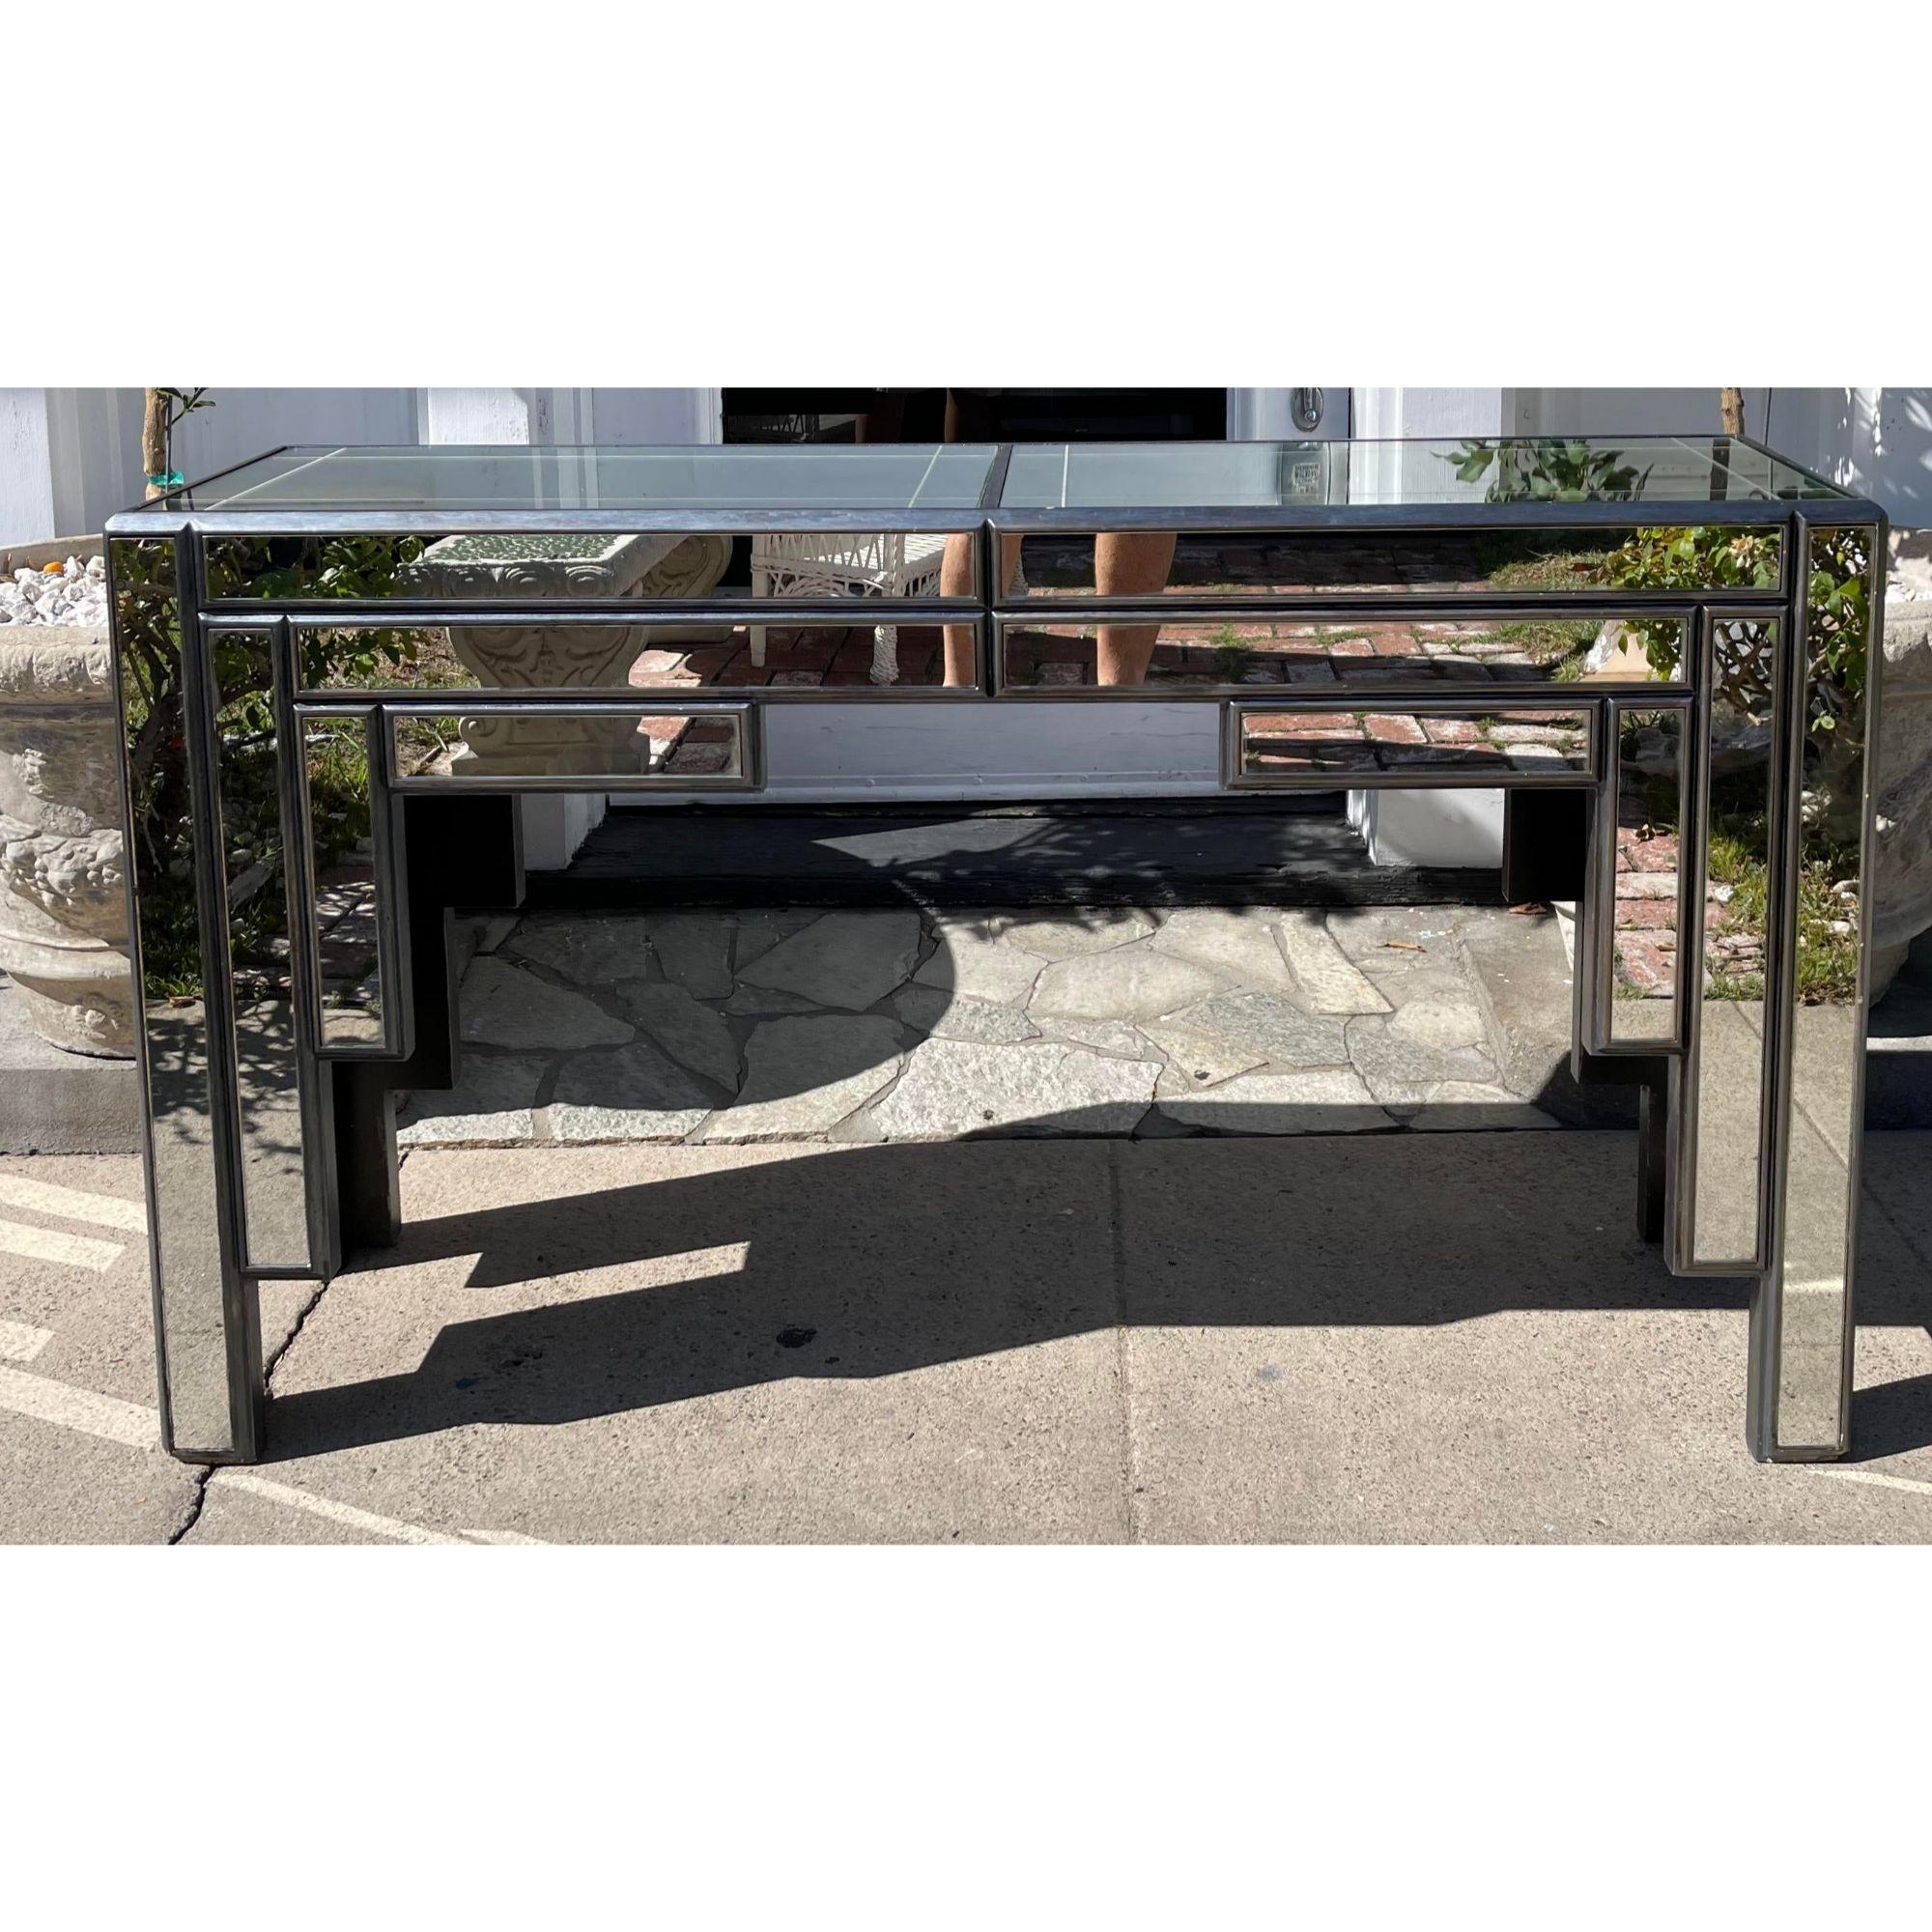 Vintage Art Deco theater mirrored console table.

Additional information: 
Materials: Mirror.
Color: Silver.
Period: Mid-20th century.
Styles: Art Deco.
Table Shape: Rectangle.
Item Type: Vintage, Antique or Pre-owned.
Dimensions: 53.5